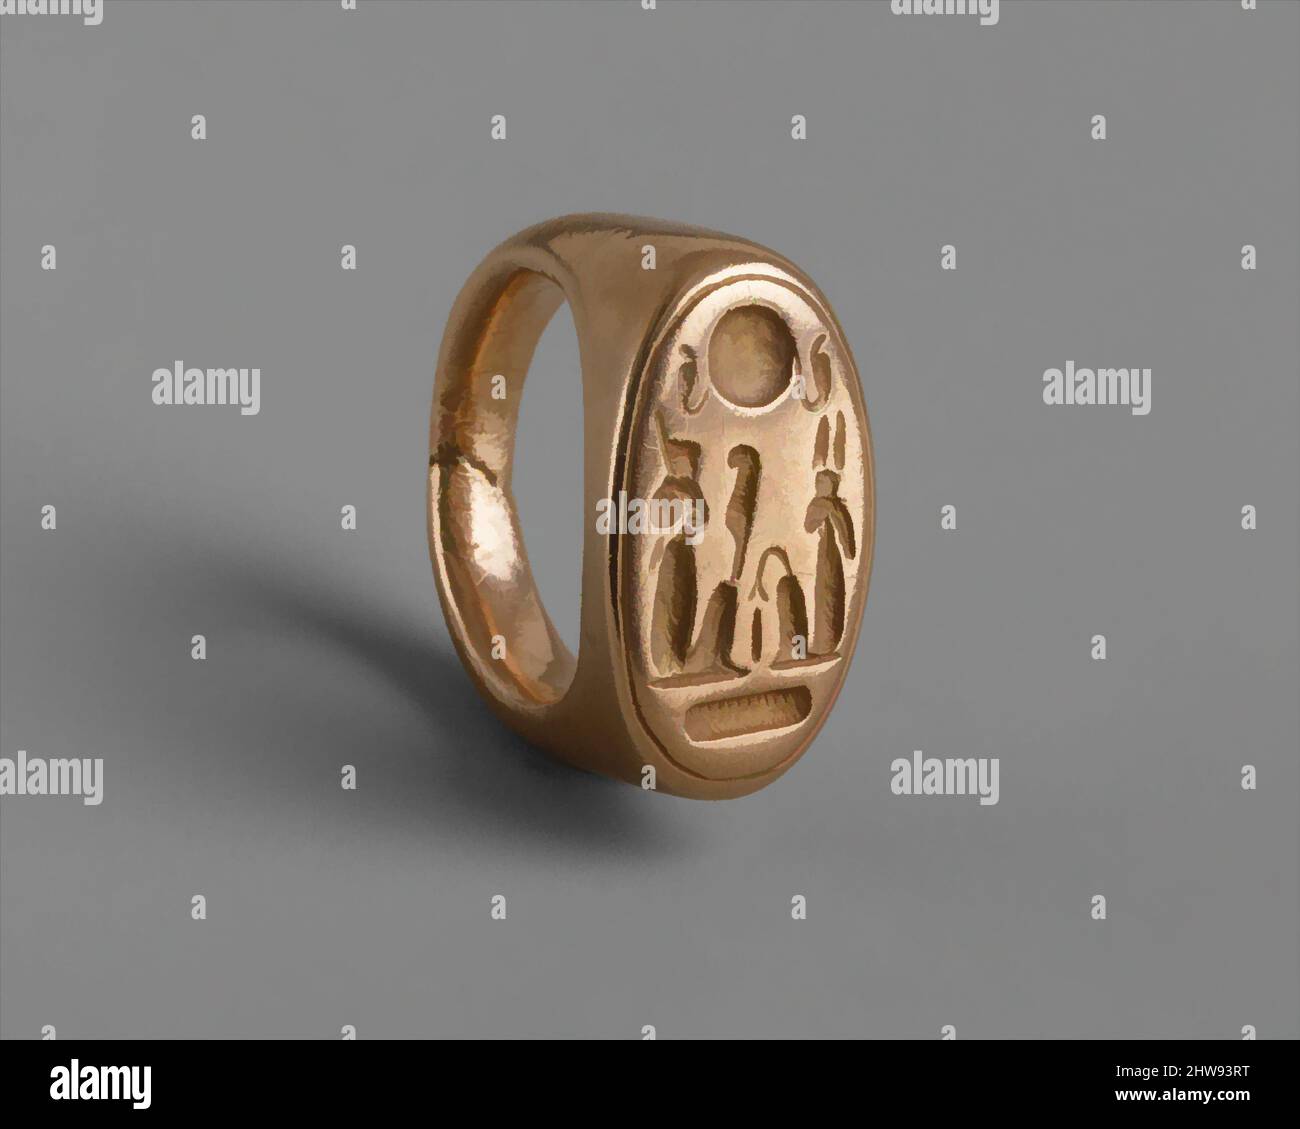 art inspired by finger ring depicting king akhenaten and queen nefertiti as shu and tefnut new kingdom amarna period dynasty 18 ca 13531336 bc from egypt middle egypt amarna akhetaten town petrie excavations 189192 gold diam 25 cm 1 in l of bezel 23 cm 78 in classic works modernized by artotop with a splash of modernity shapes color and value eye catching visual impact on art emotions through freedom of artworks in a contemporary way a timeless message pursuing a wildly creative new direction artists turning to the digital medium and creating the artotop nft 2HW93RT